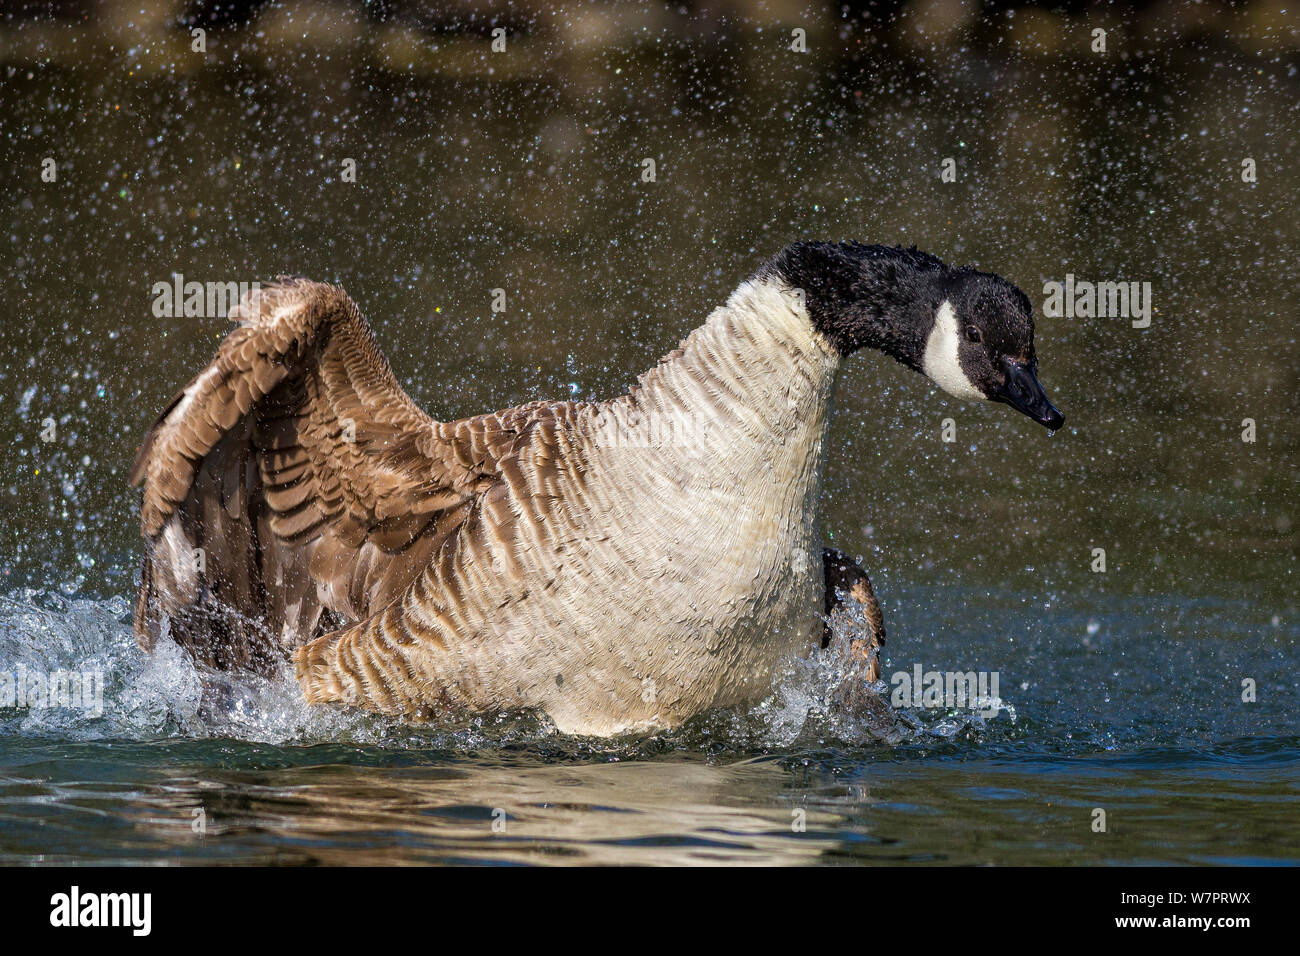 Canada goose (Branta canadensis) bathing. Southern Norway, March. Stock Photo